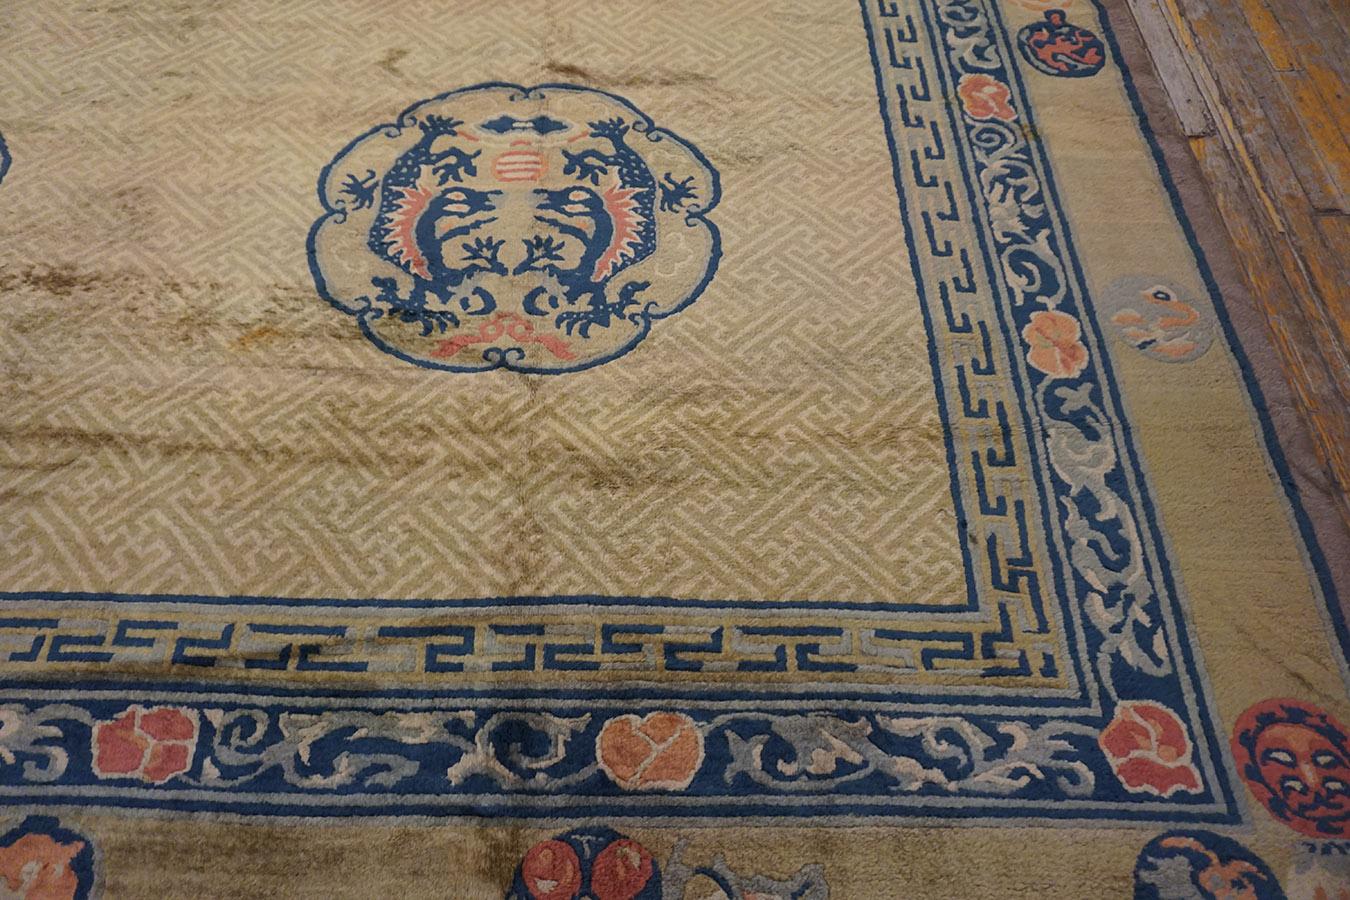 Antique Chinese Rug 11'x 17' 6